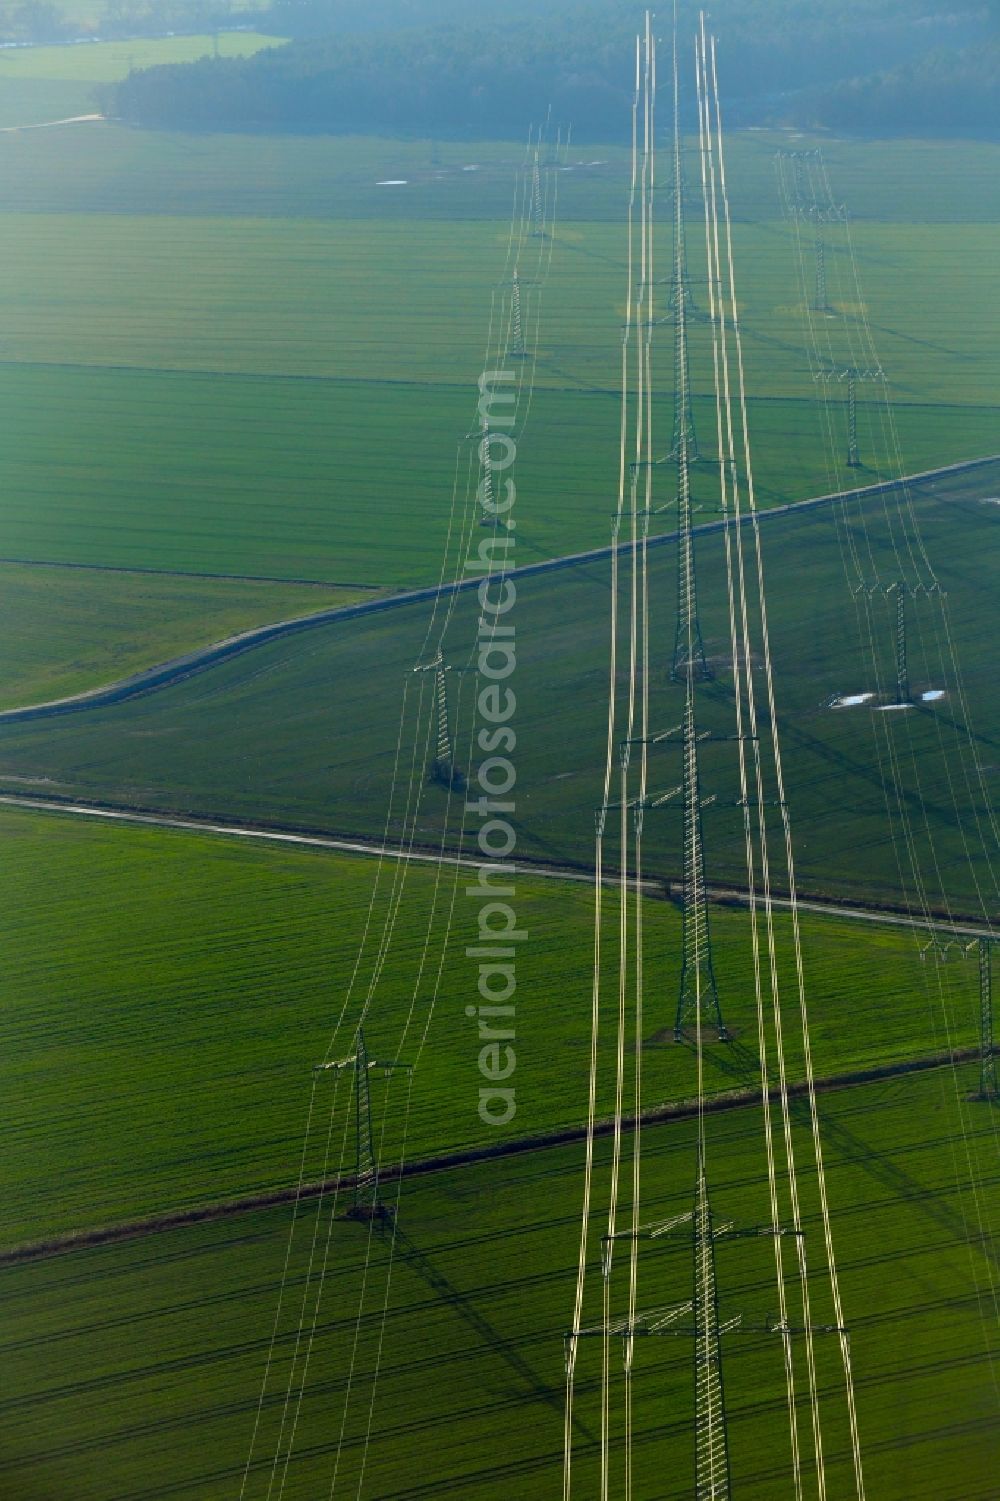 Aerial image Wansdorf - Current route of the power lines and pylons in Wansdorf in the state Brandenburg, Germany